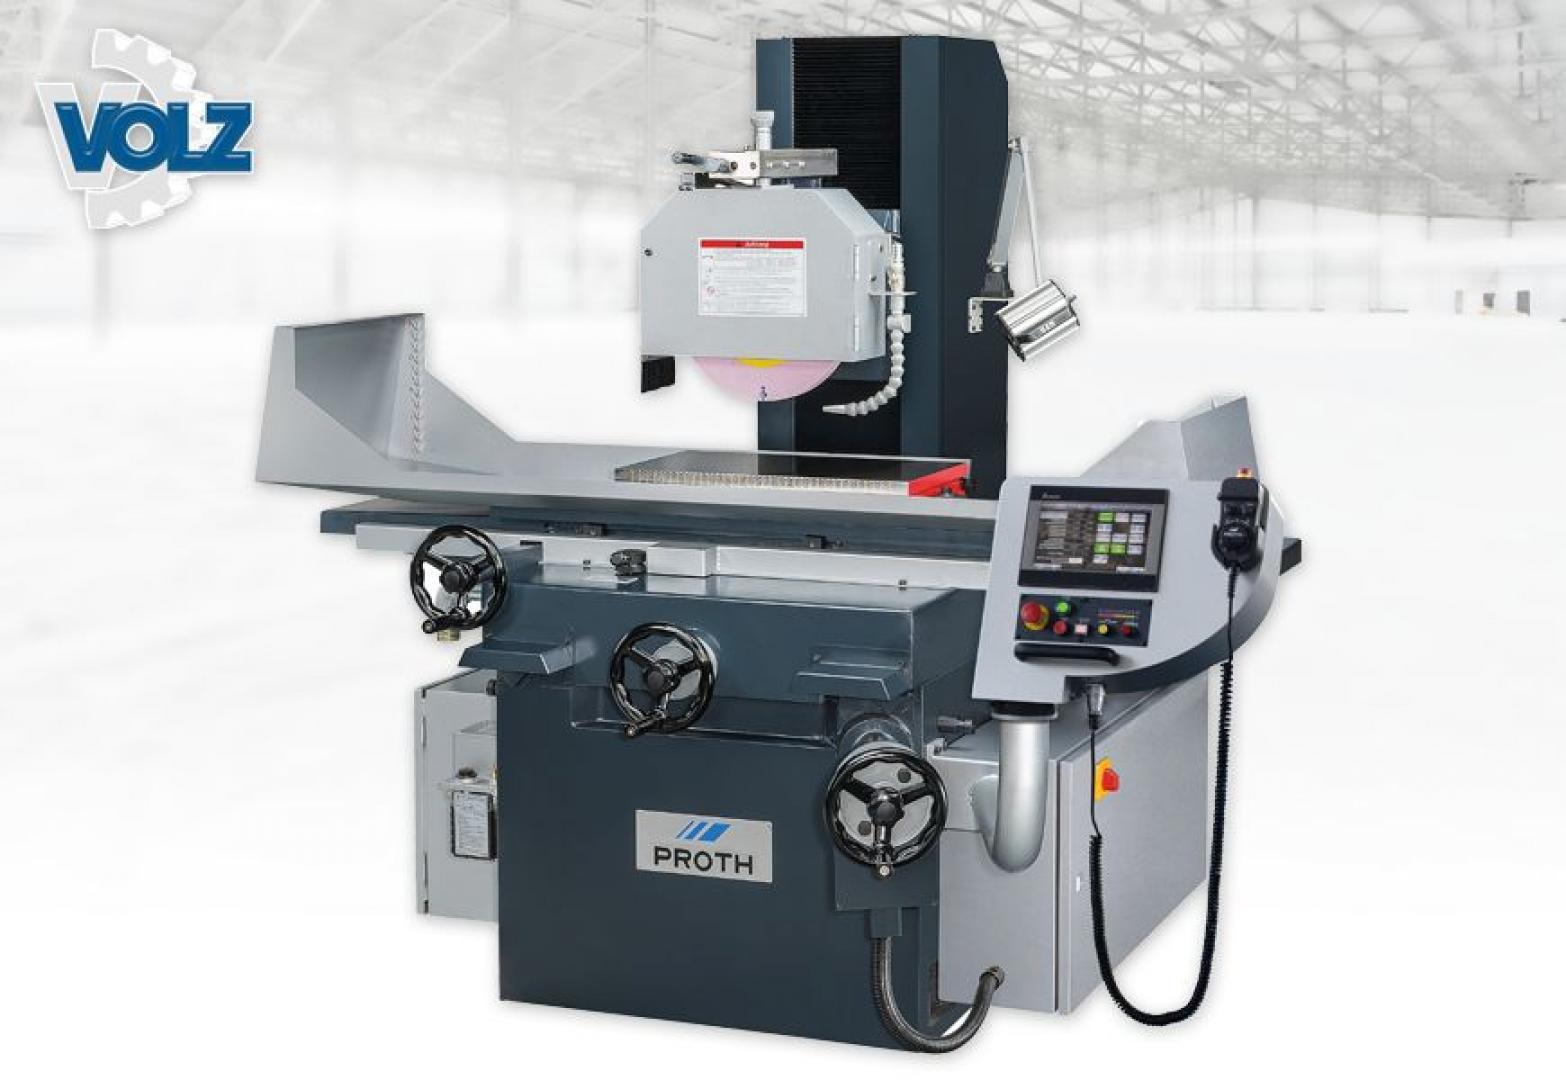 Surface Grinding Machine